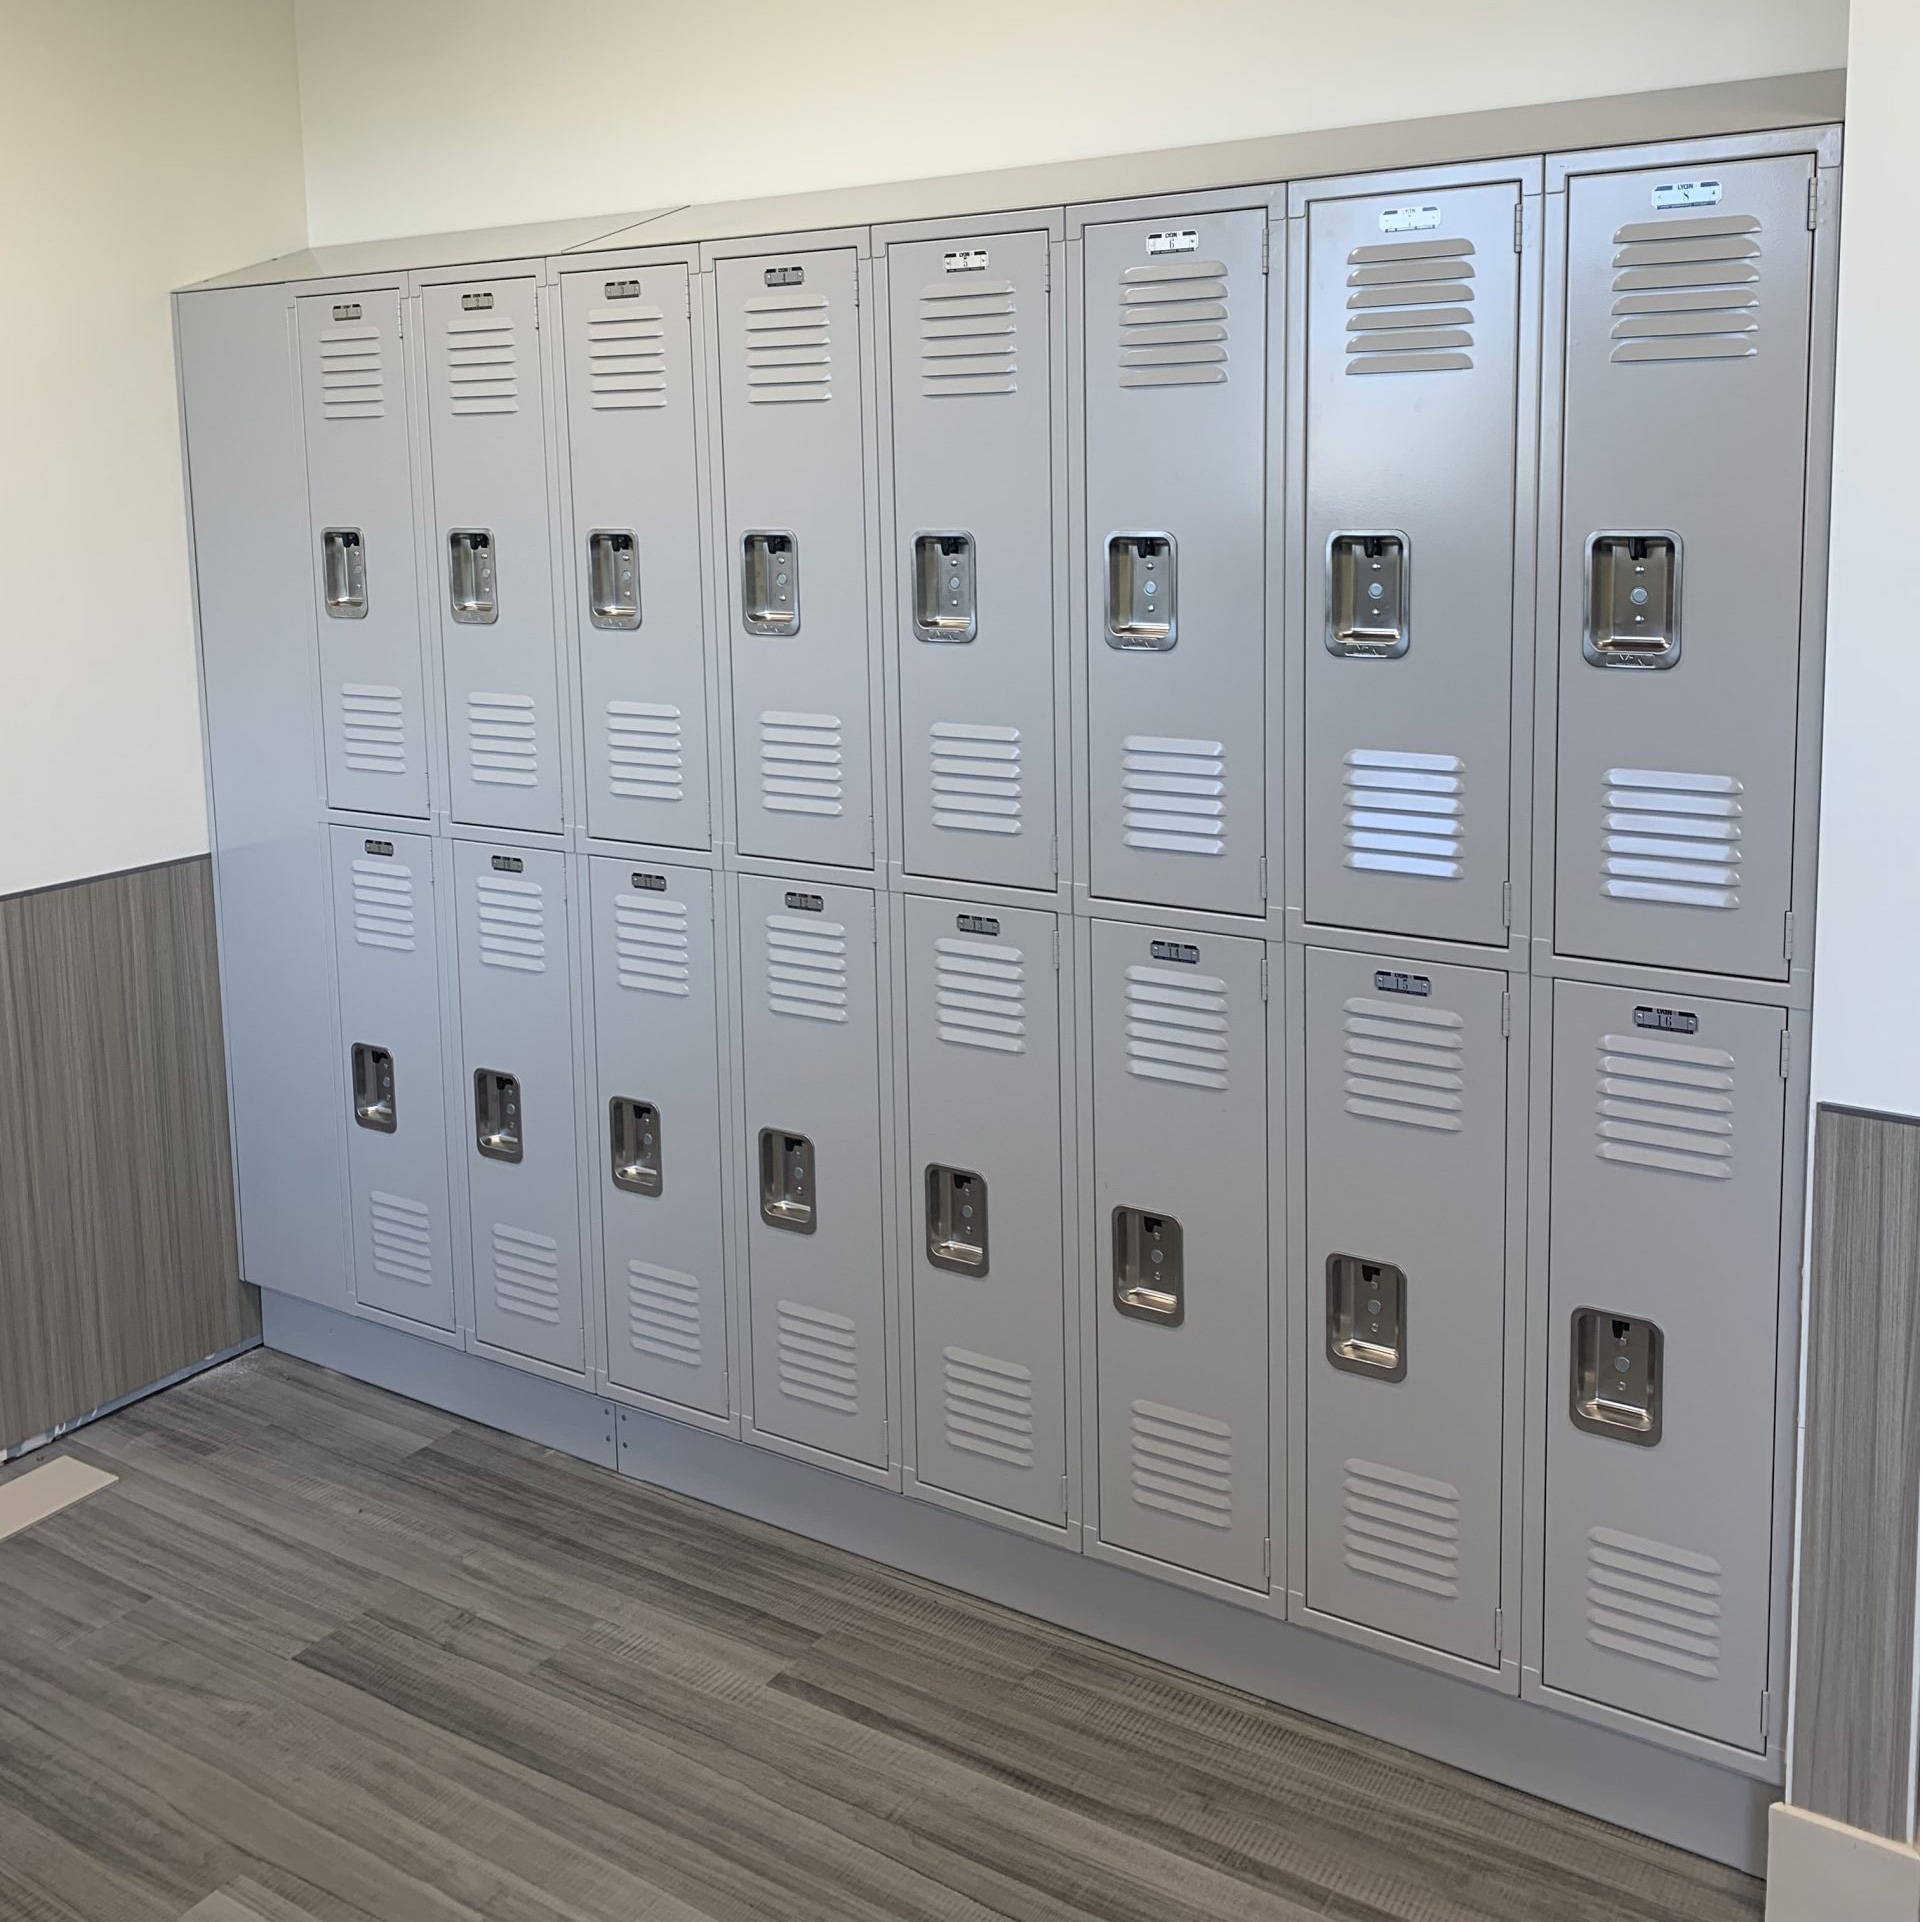 Lyon double-tier standard lockers for hospital use in a confined space.